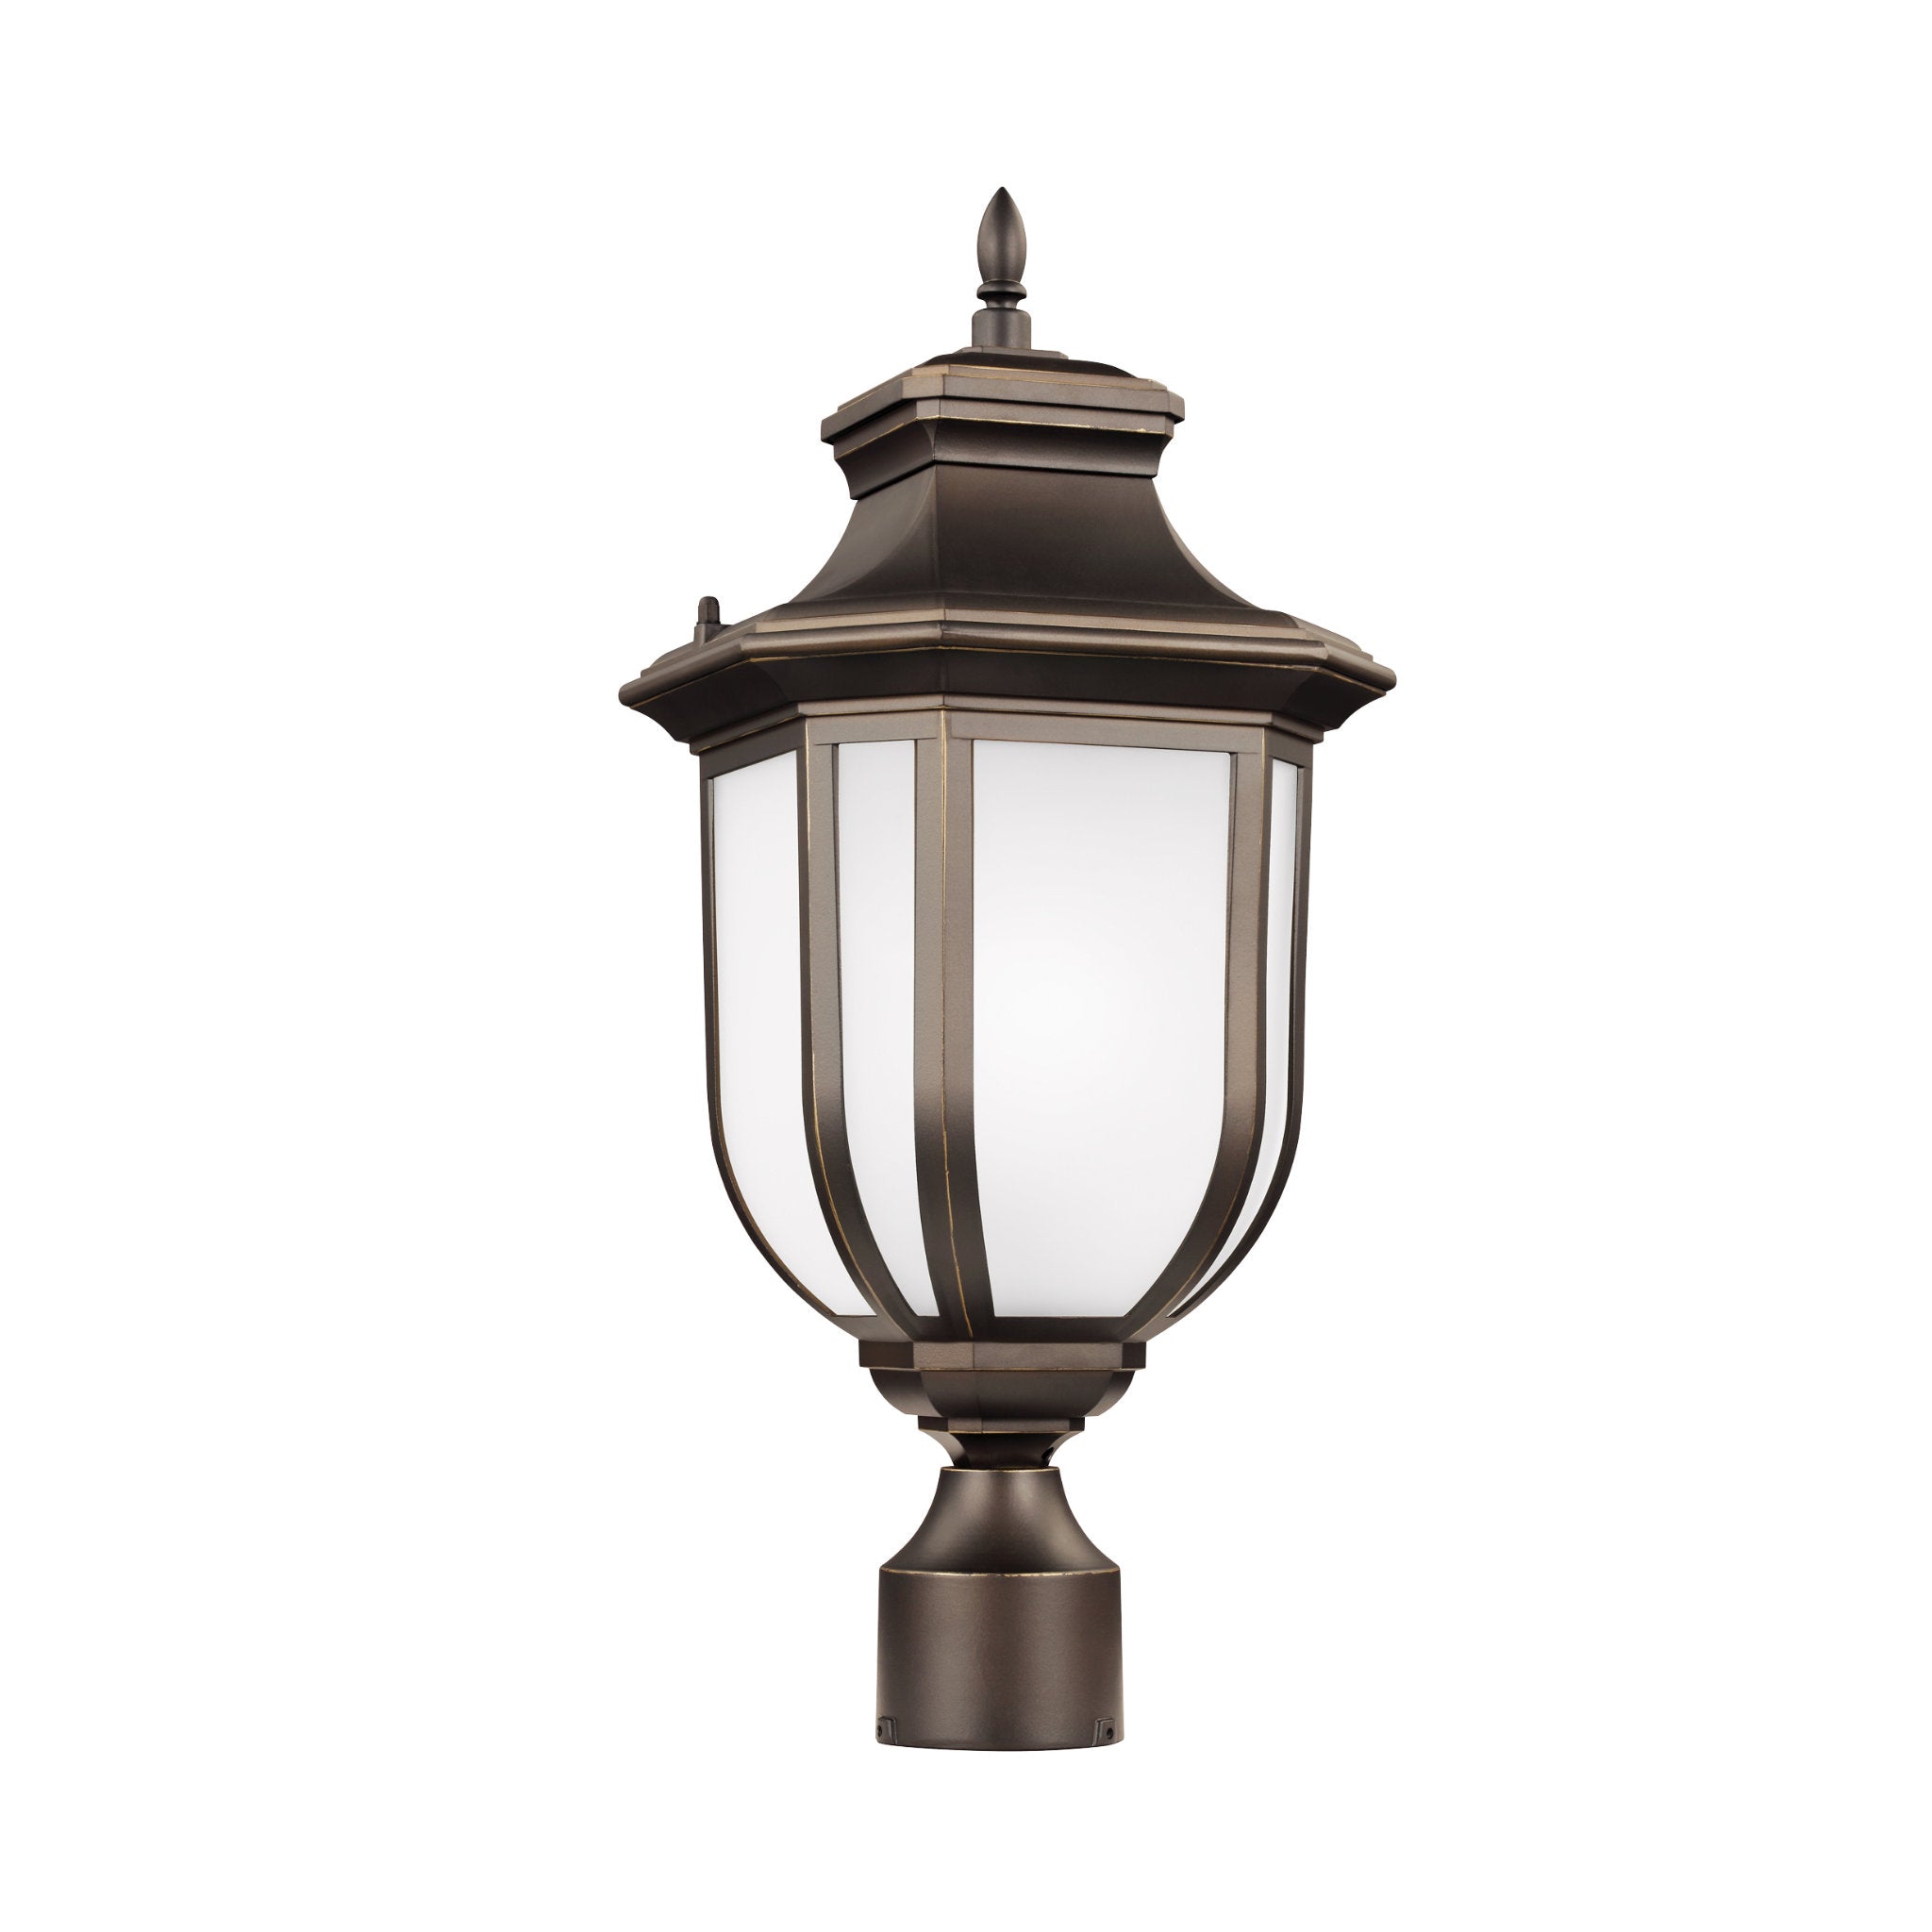 Childress One Light Outdoor Post Lantern Traditional Fixture 20.5" Height Die Cast Aluminum Satin Etched Shade in Antique Bronze